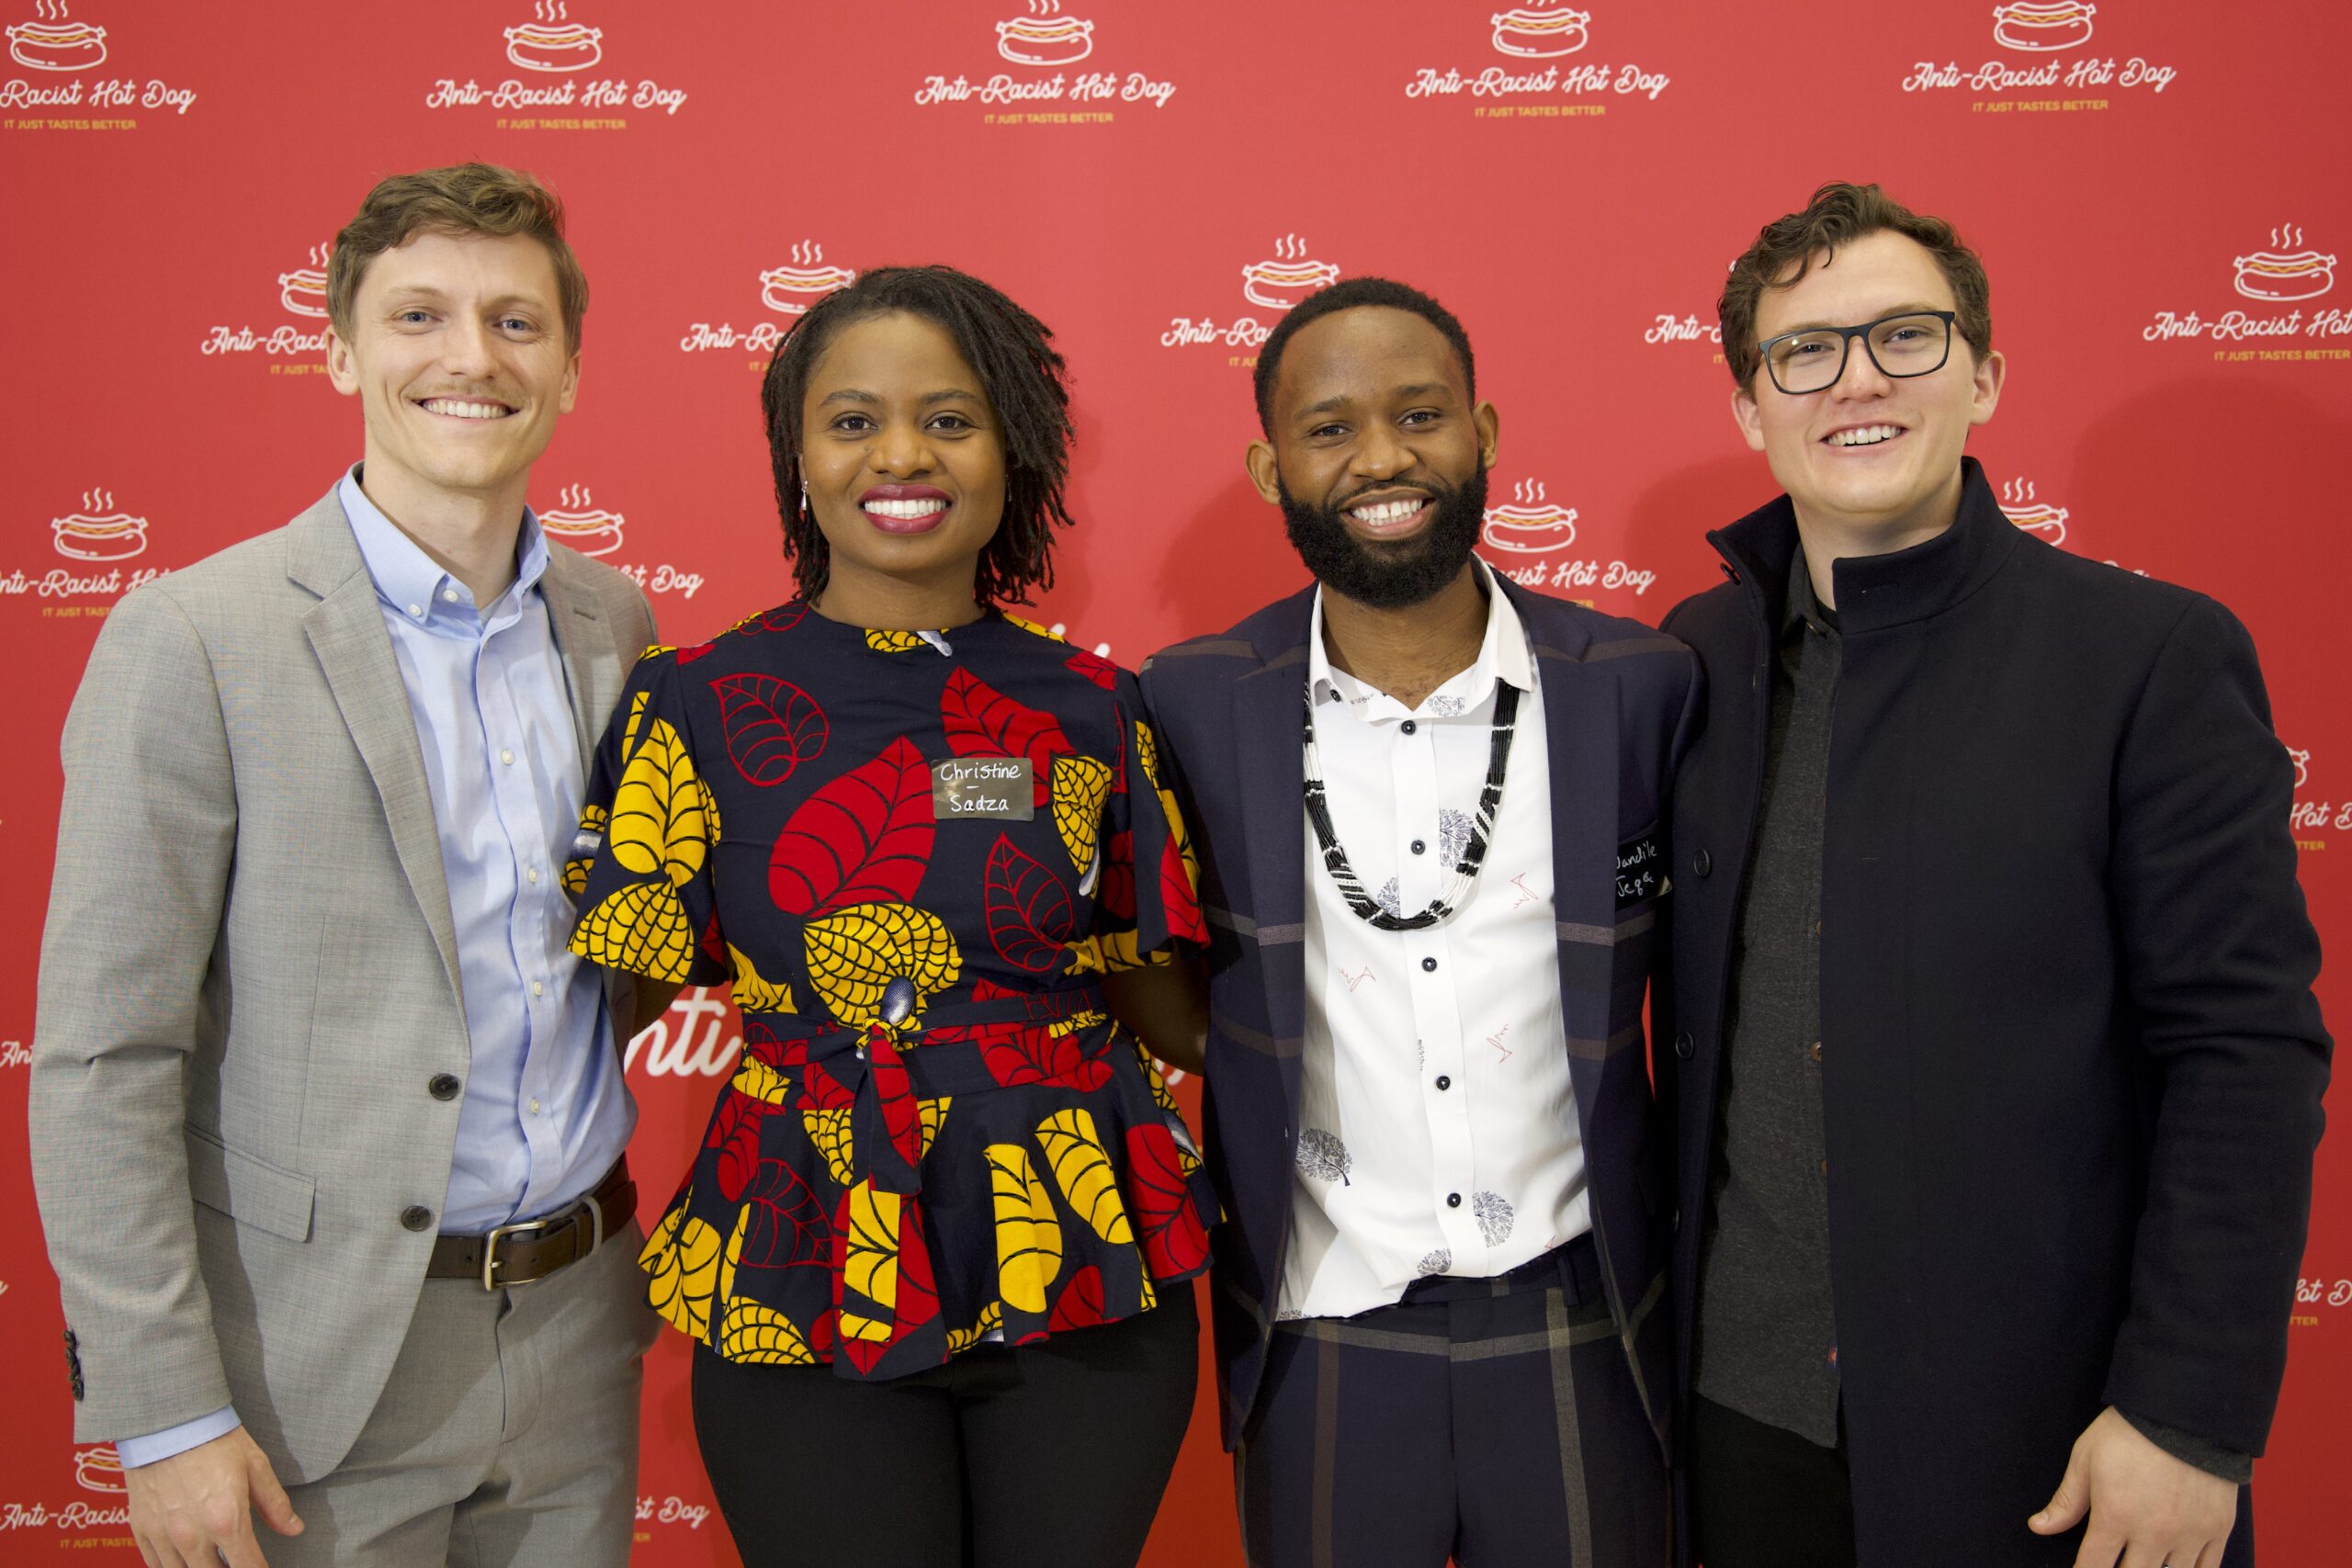 From left: Stephen Erich, Christine Mapondera, Wandile Mthiyane, and Josh Sanabria at a previous Anti-Racist Hot Dog event.